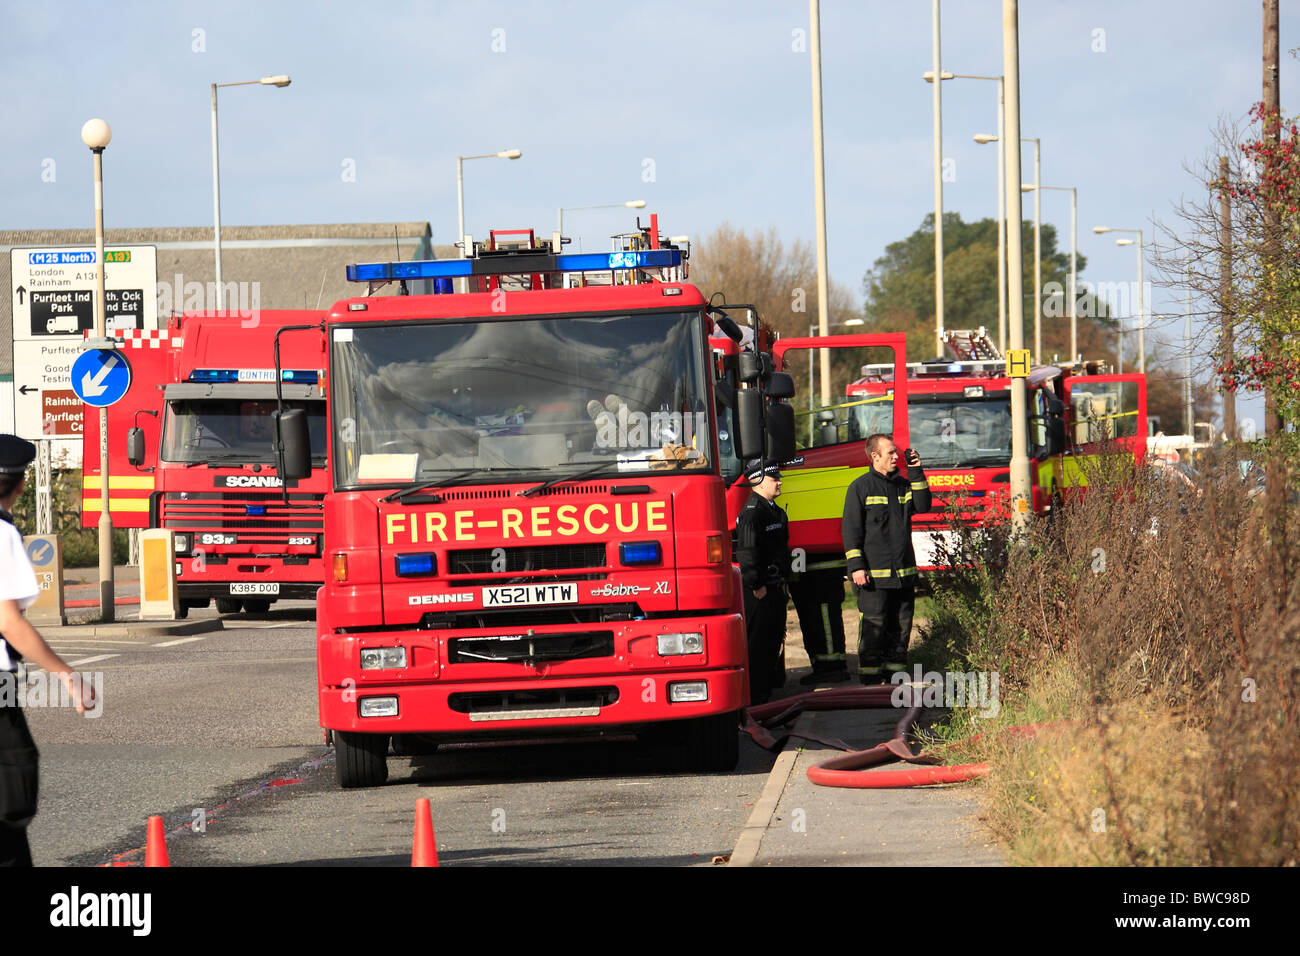 Fire Engines at the scene of a fire Stock Photo